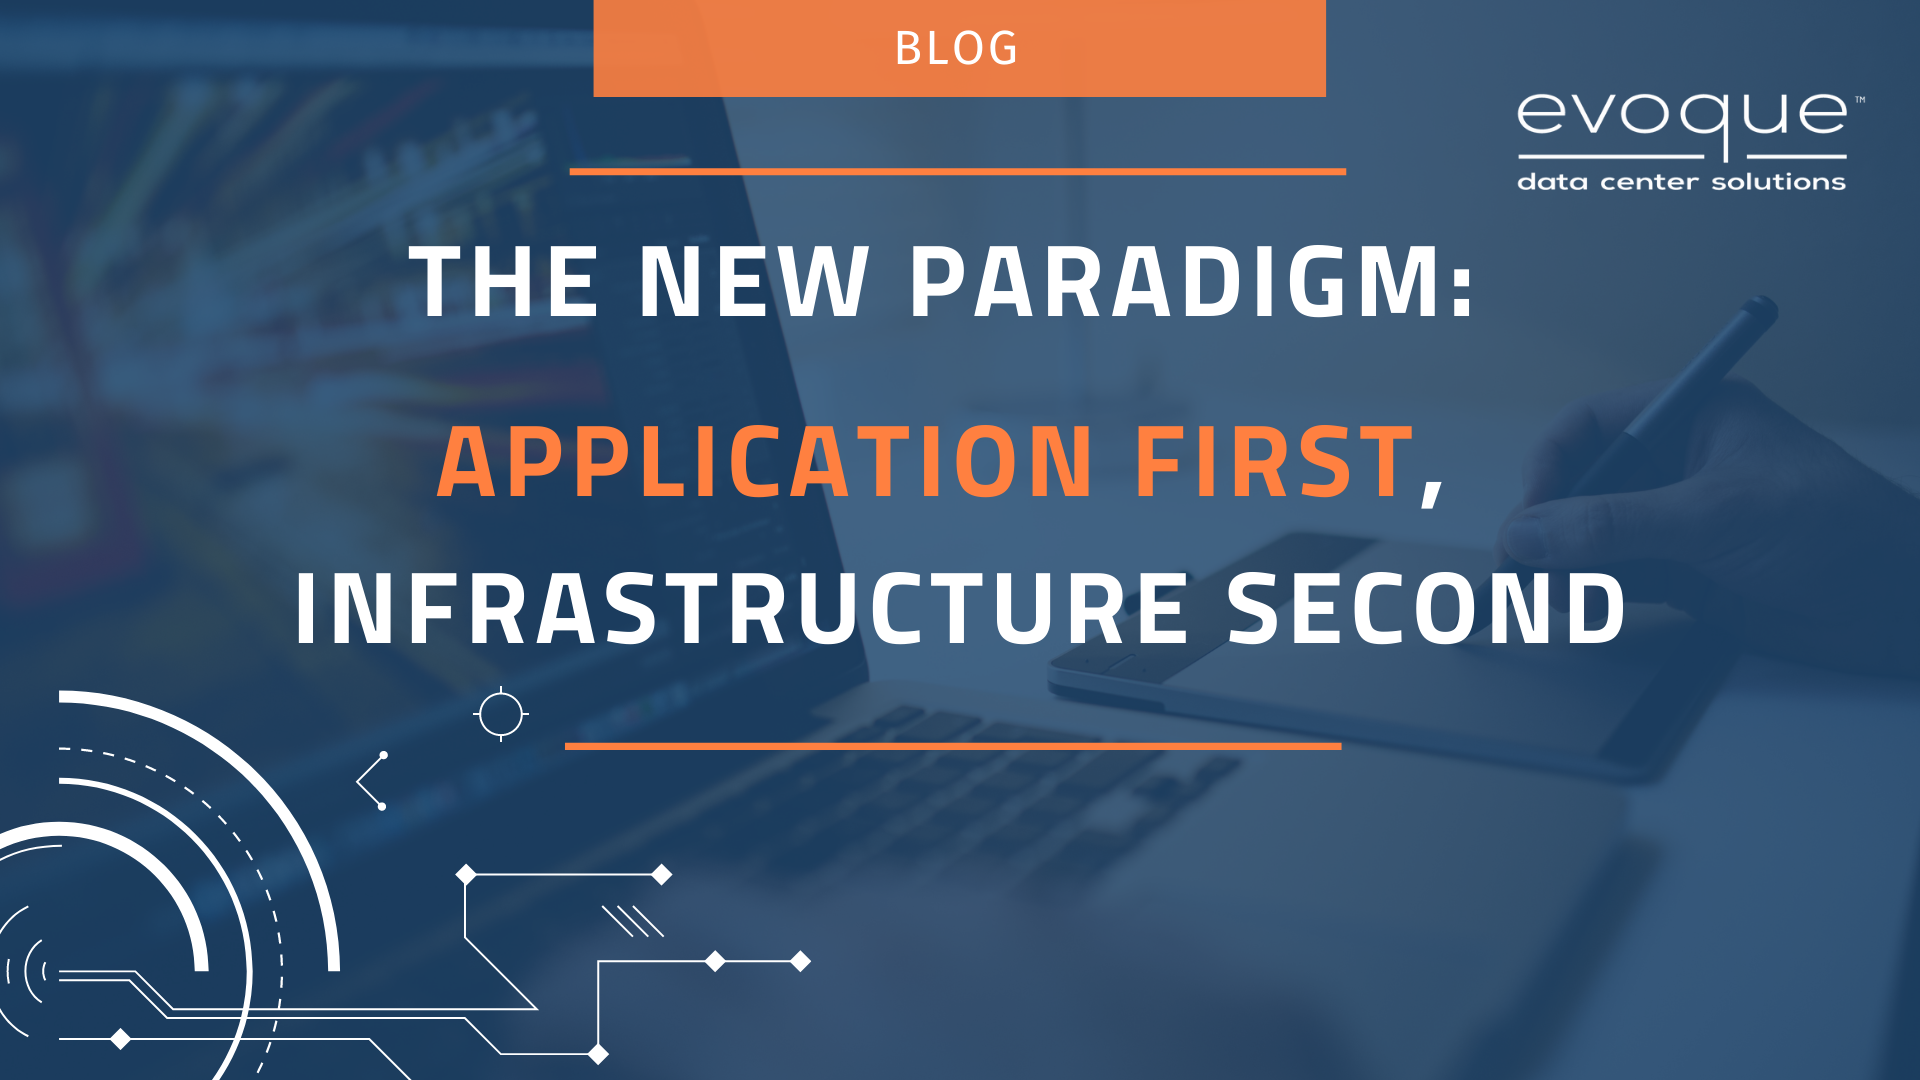 The New Paradigm: Application First, Infrastructure Second